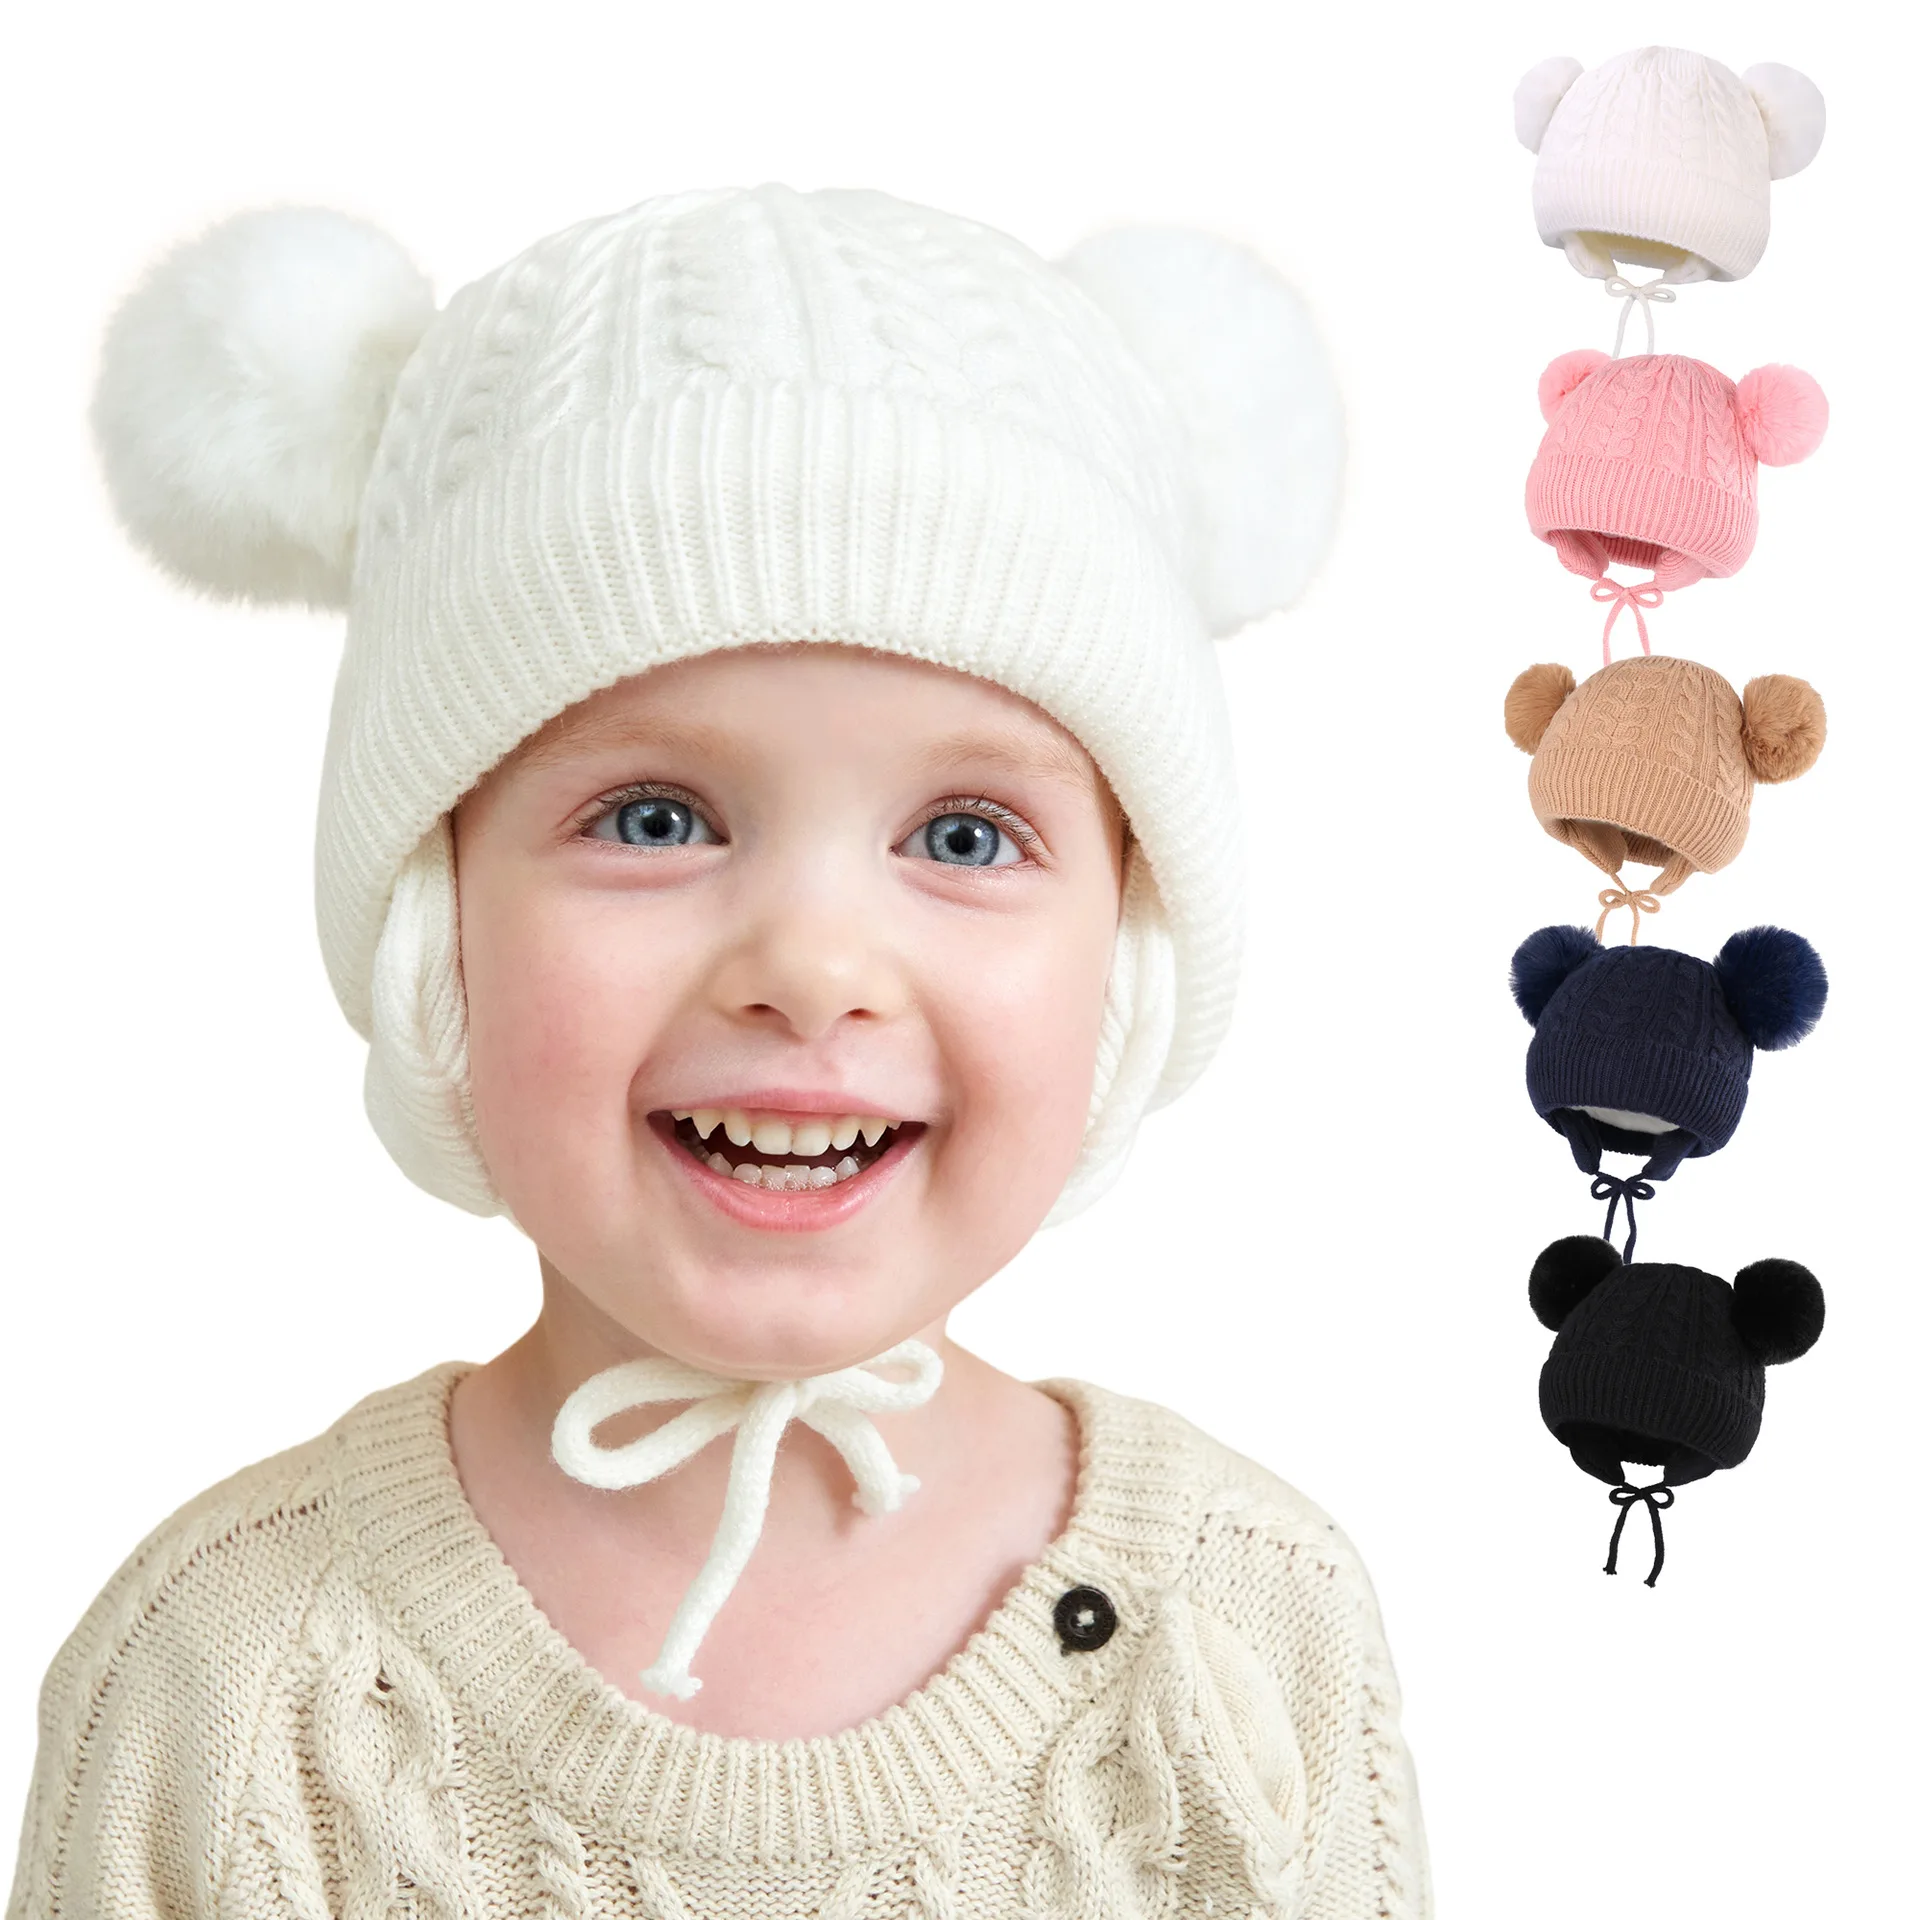 Cute Baby Winter Hat Thicken Plush Baby Hat With Earflaps Infant Warm Hat Beanie Cap Child Knitting Hat Baby Item 0-3 Years 3pc kawaii christmas eve wish card creative mini christmas card cute child christmas day blessing message with envelope card